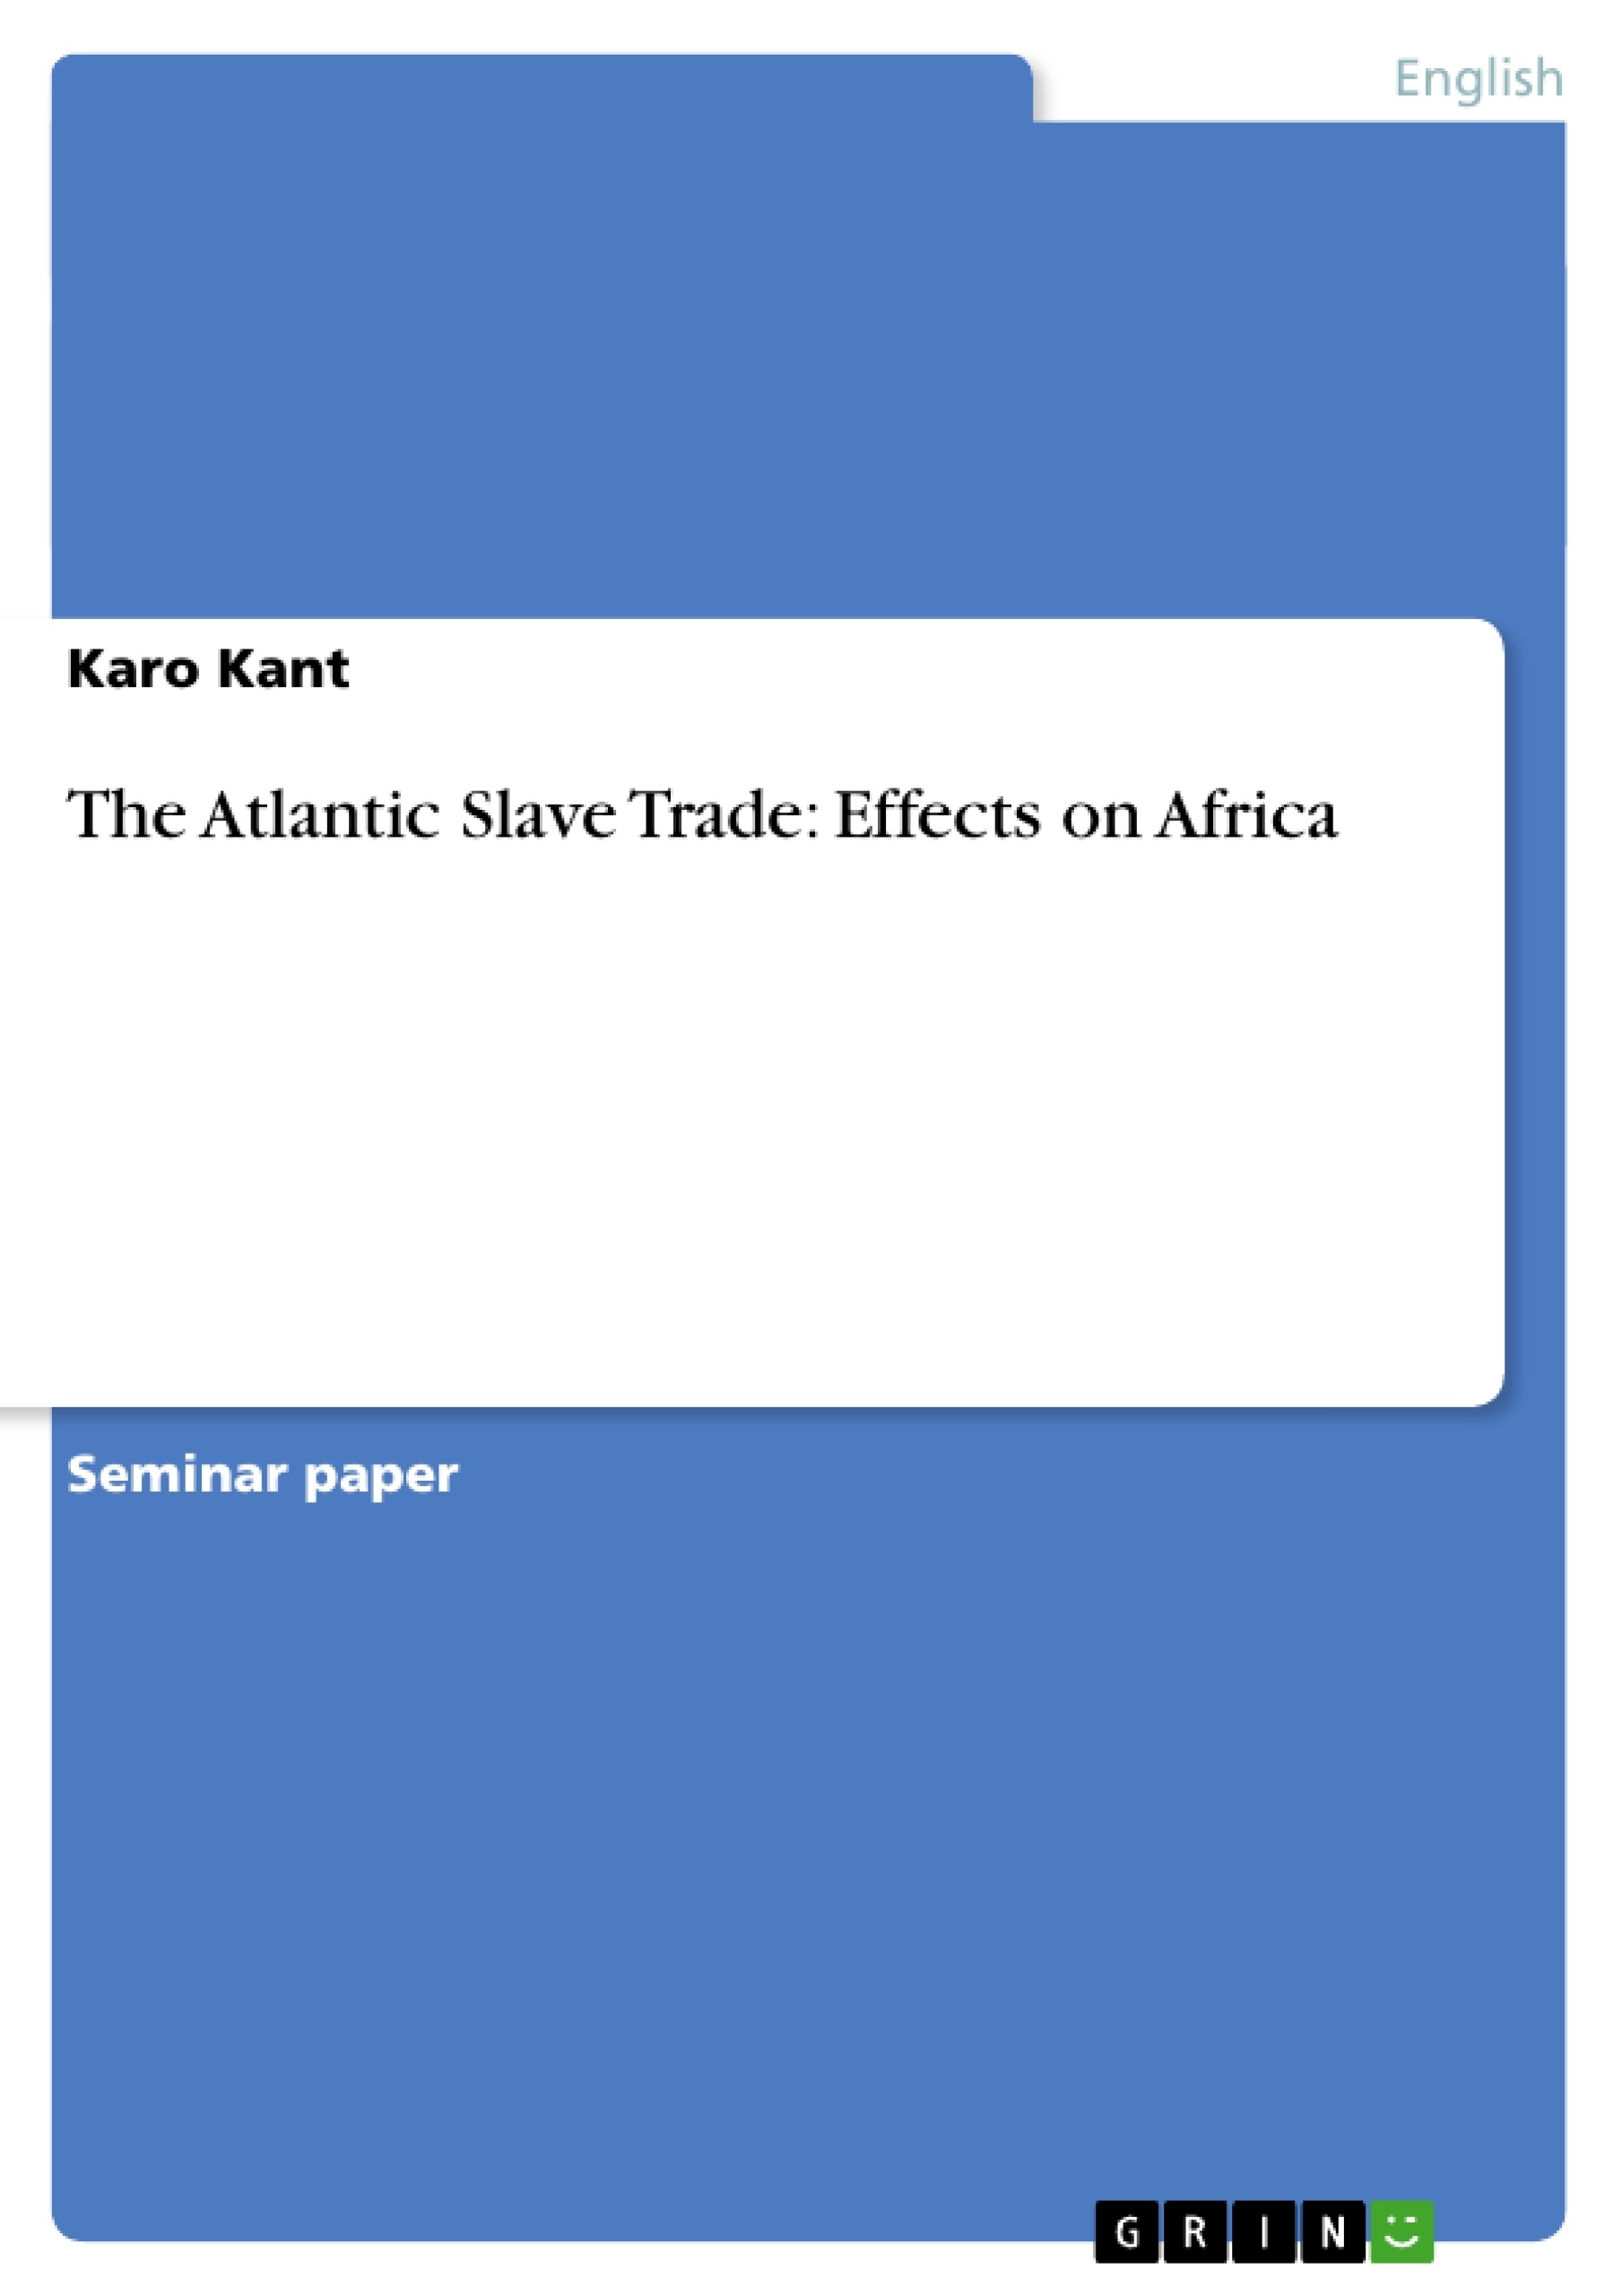 Titre: The Atlantic Slave Trade: Effects on Africa